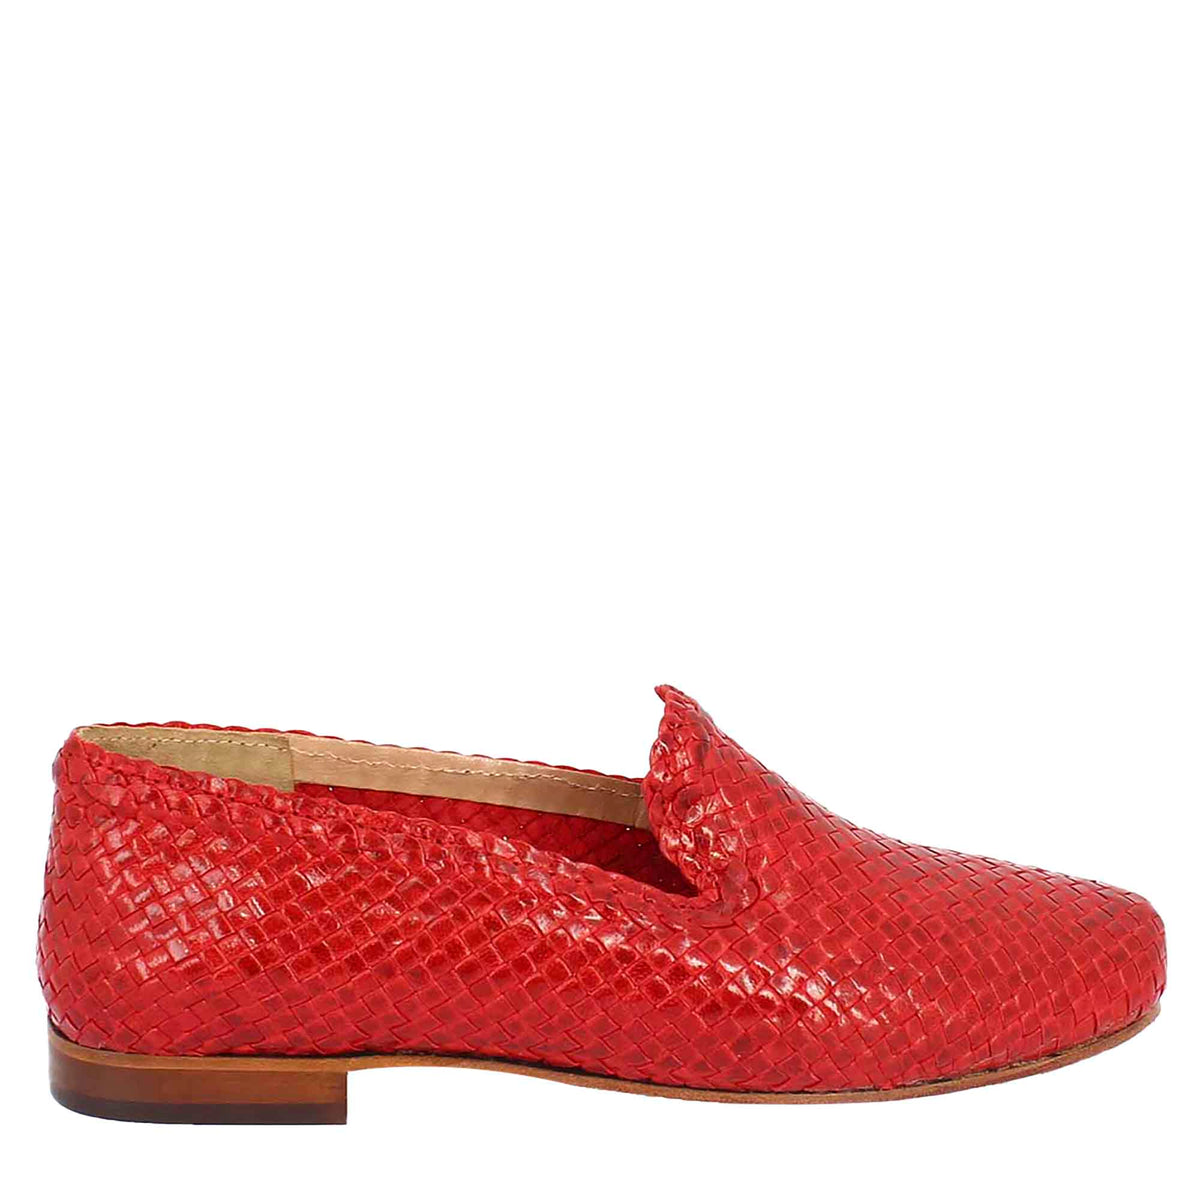 Handmade women's moccasins in red woven leather 